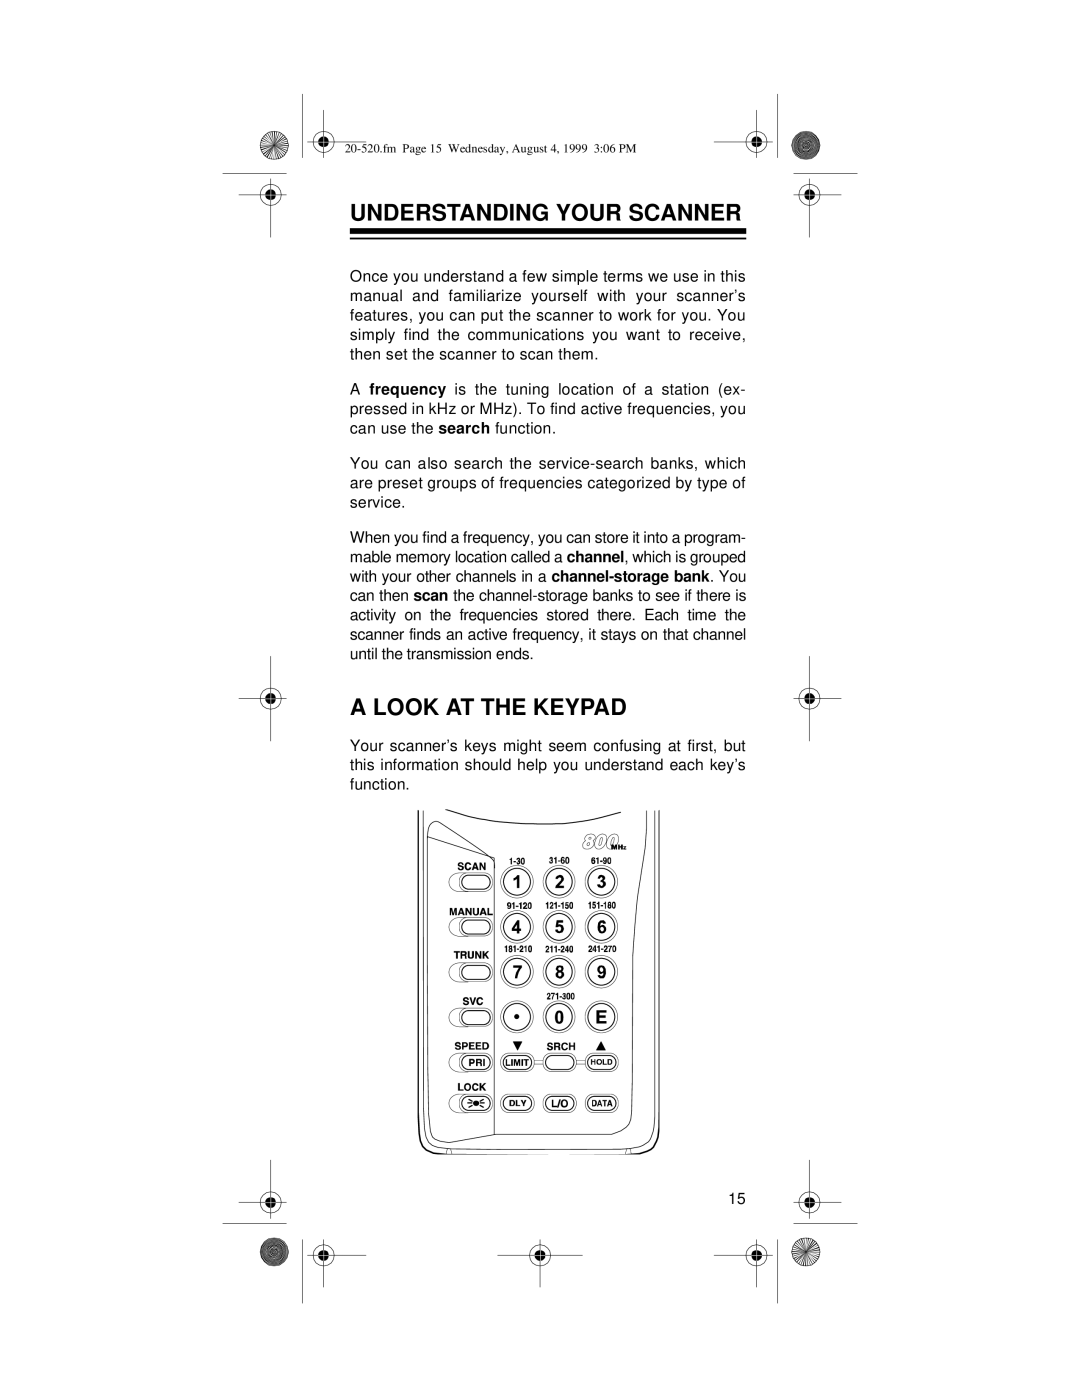 Radio Shack PRO-90 Understanding Your Scanner, A Look At The Keypad, fm Page 15 Wednesday, August 4, 1999 306 PM 